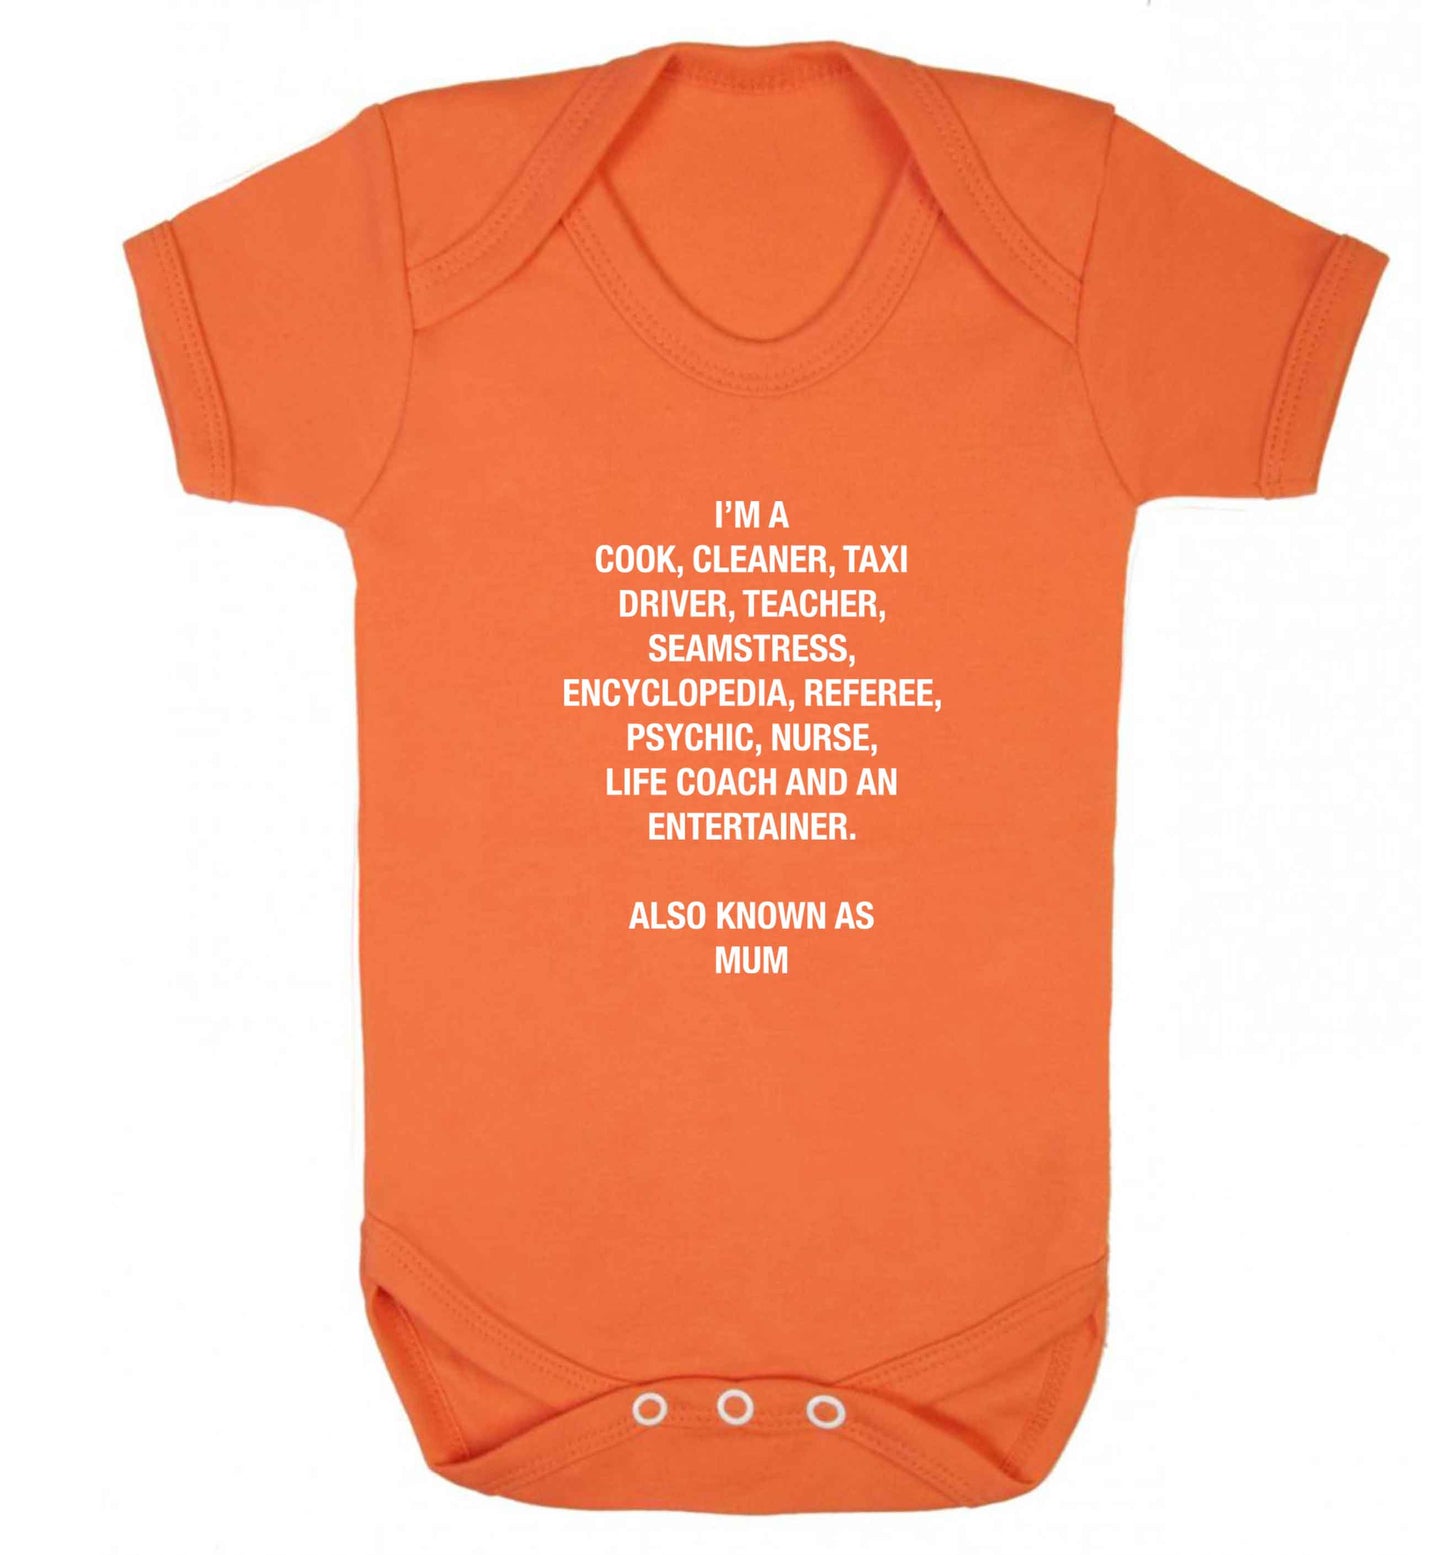 Funny gifts for your mum on mother's dayor her birthday! Mum, cook, cleaner, taxi driver, teacher, seamstress, encyclopedia, referee, psychic, nurse, life coach and entertainer baby vest orange 18-24 months